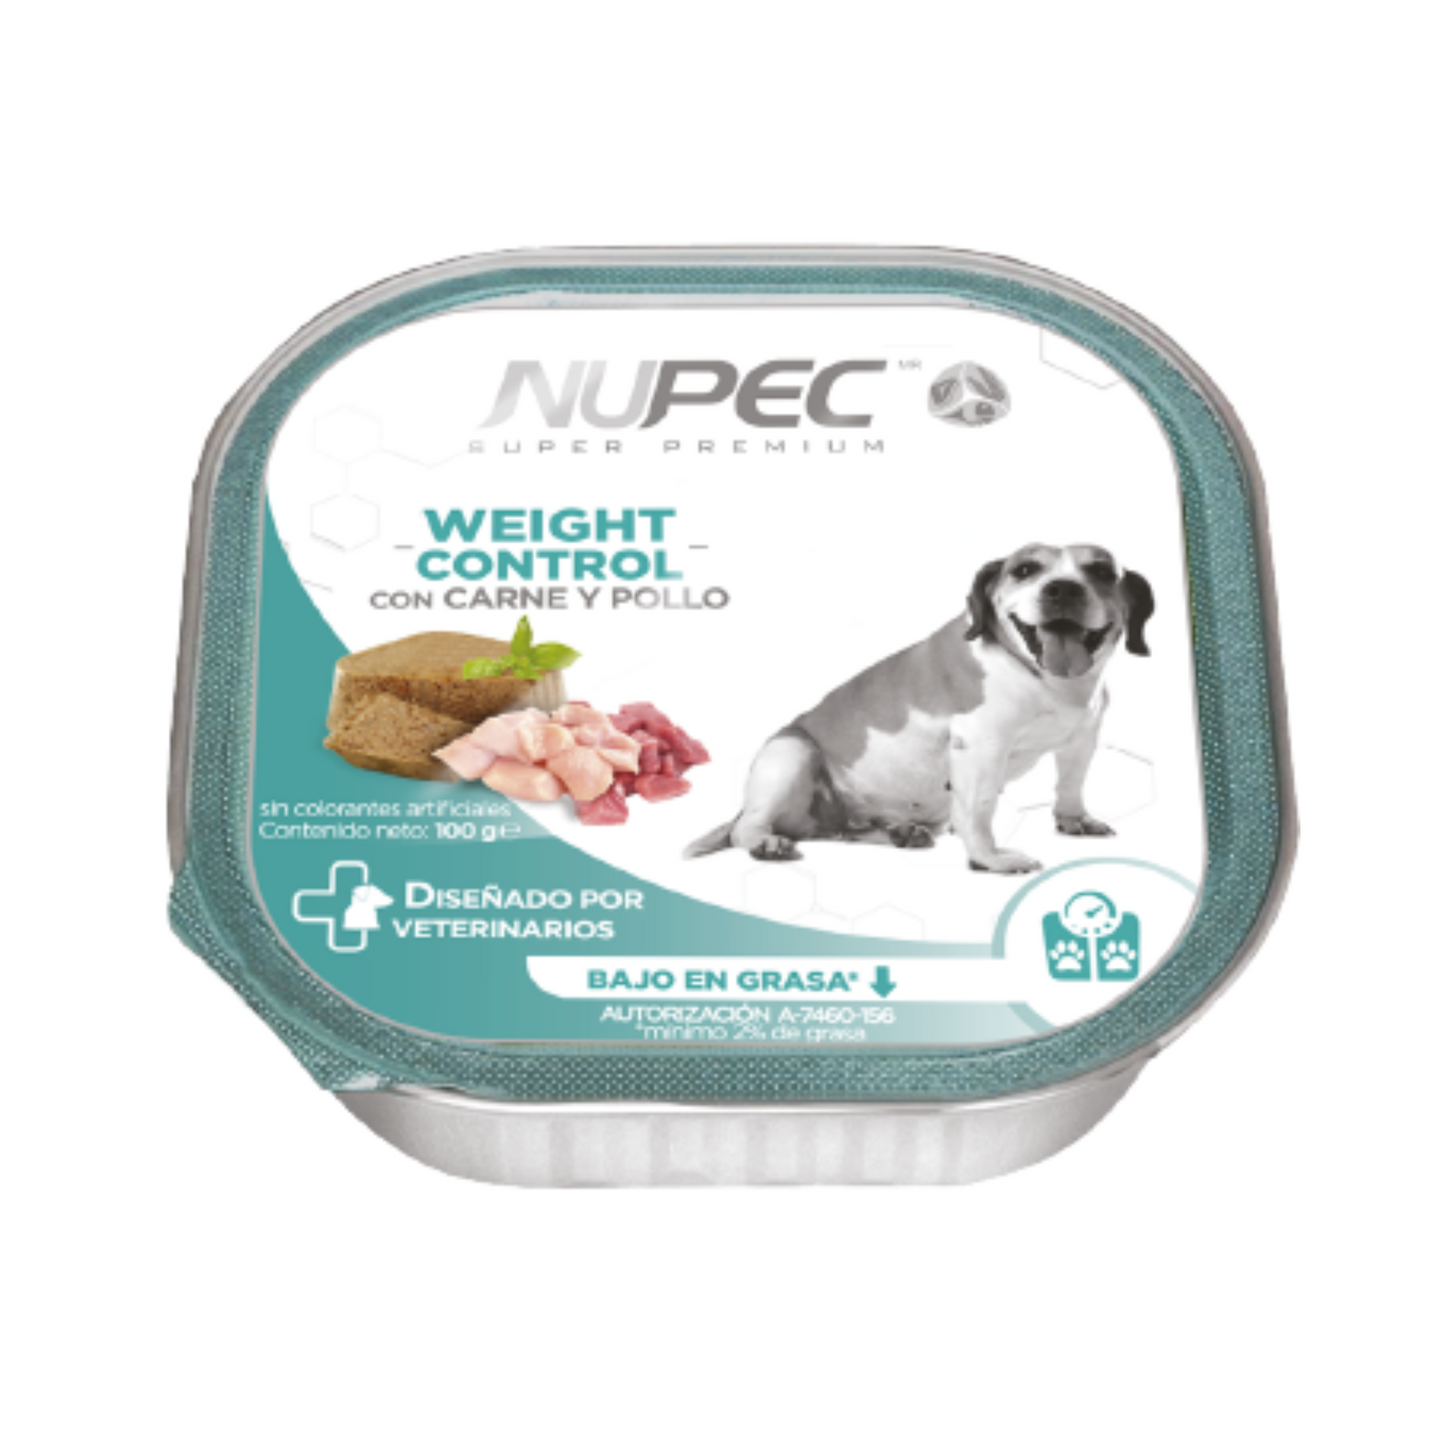 Nupec Alimento Humedo Weigthc/Digestive  4 X 100 Grs